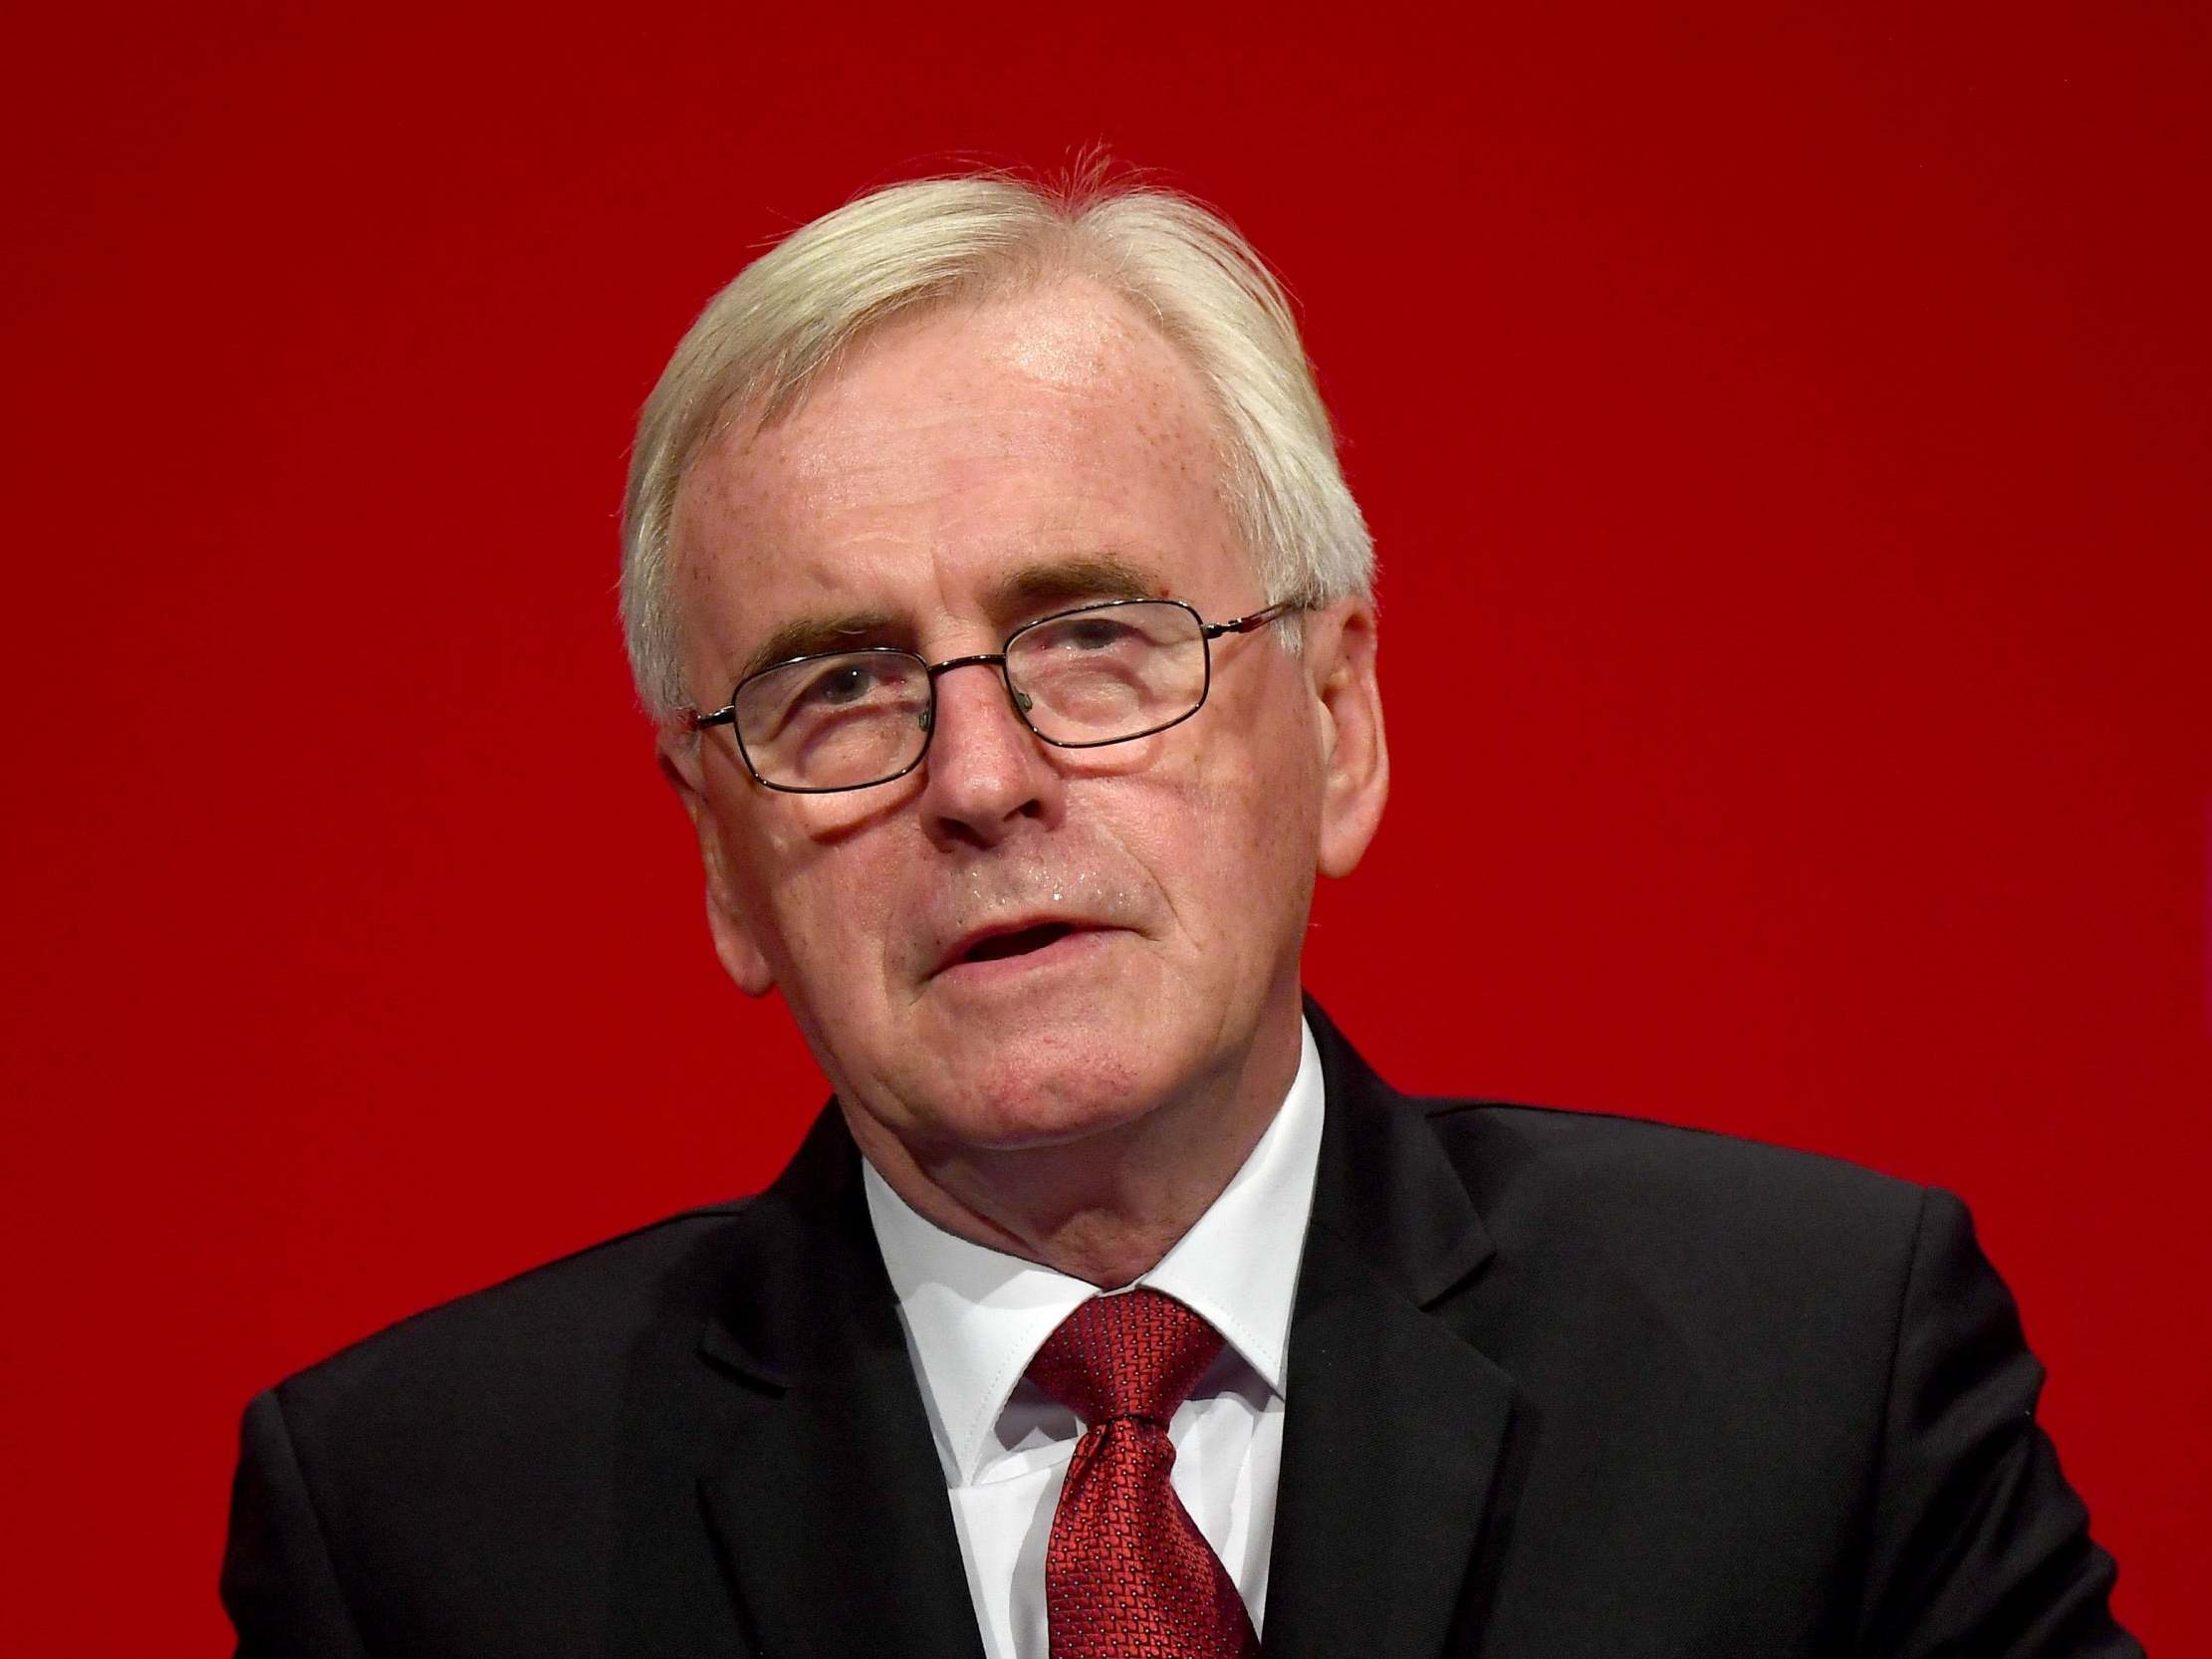 John McDonnell said a Final Say Brexit referendum could yet come before a general election – against his leader’s wishes